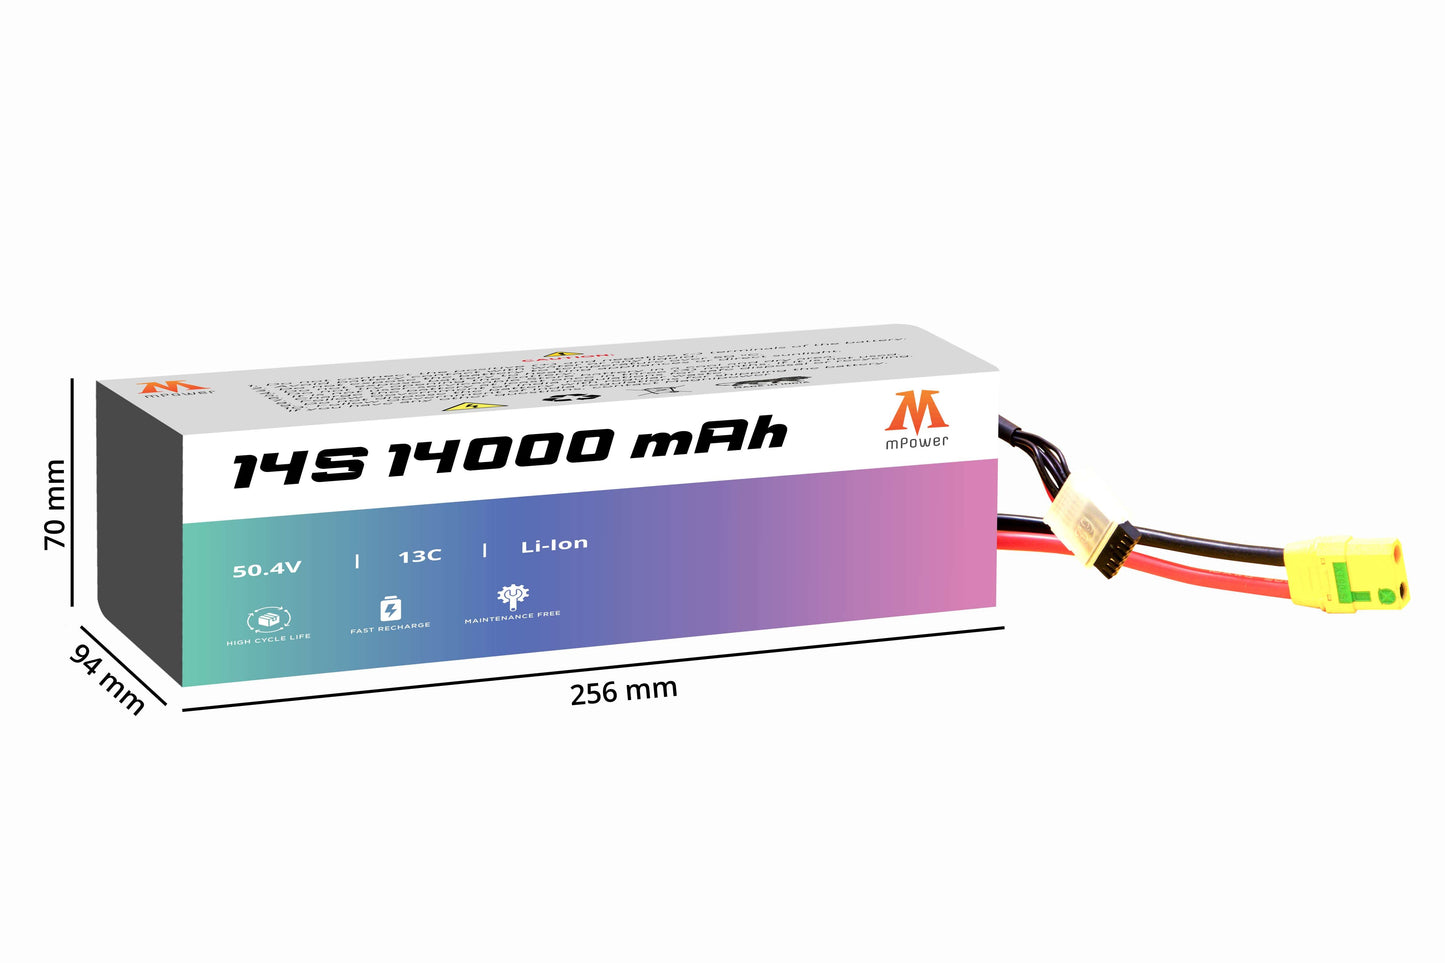 mPower 14S 14000mAh Lithium-Ion Battery for Surveillance Drones